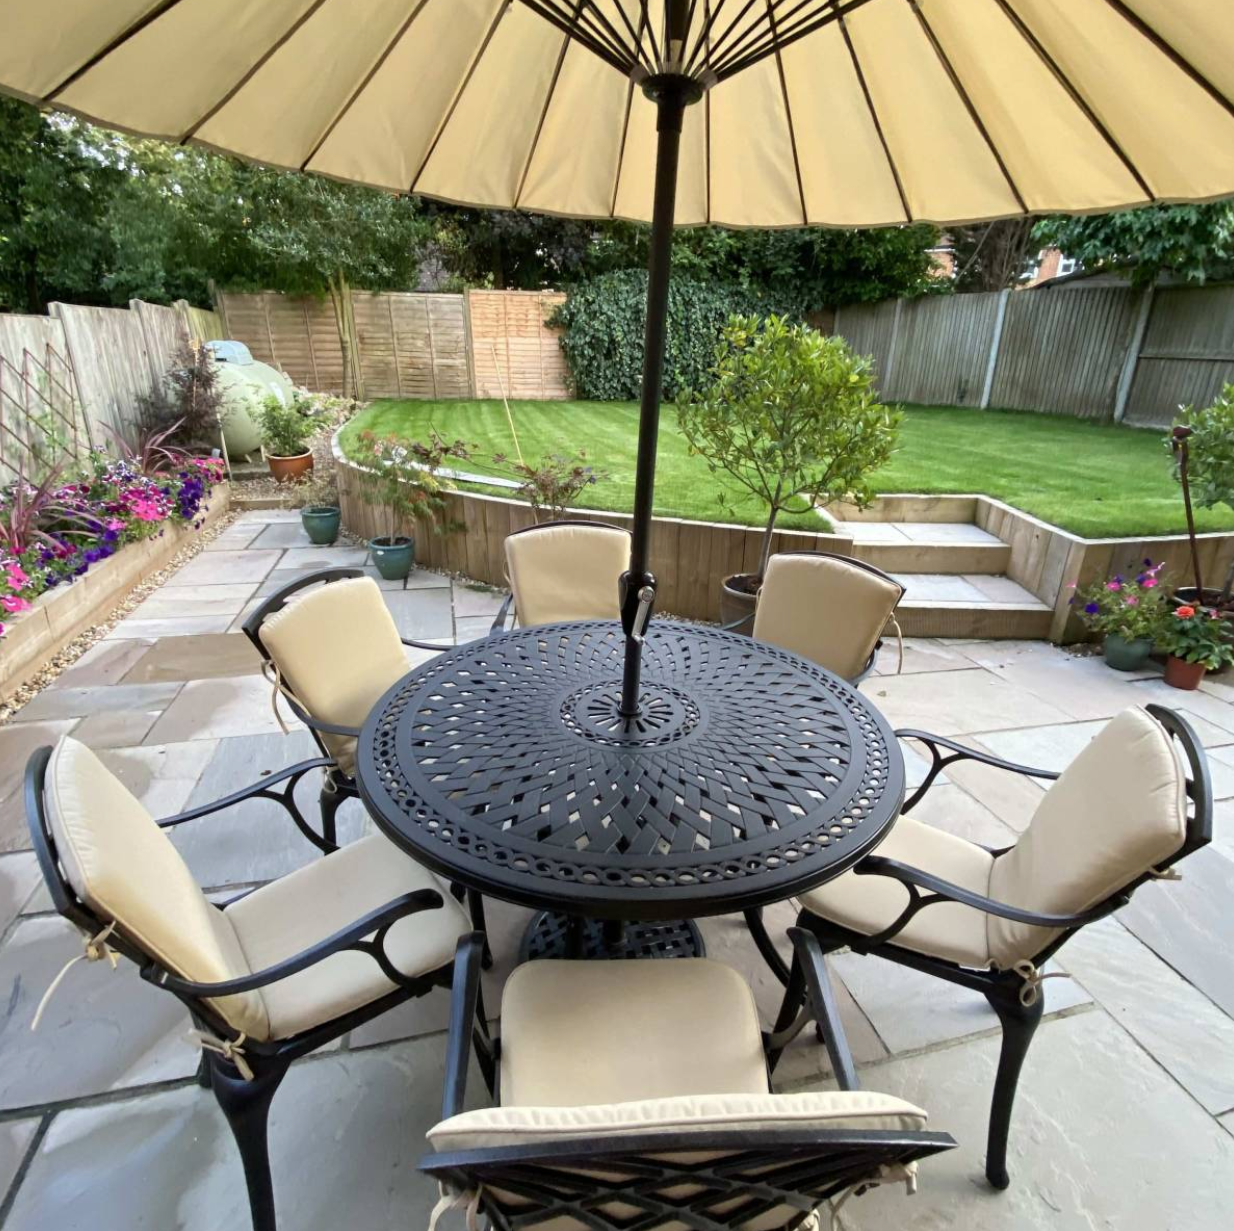 Invest in Weather-Resistant Furniture